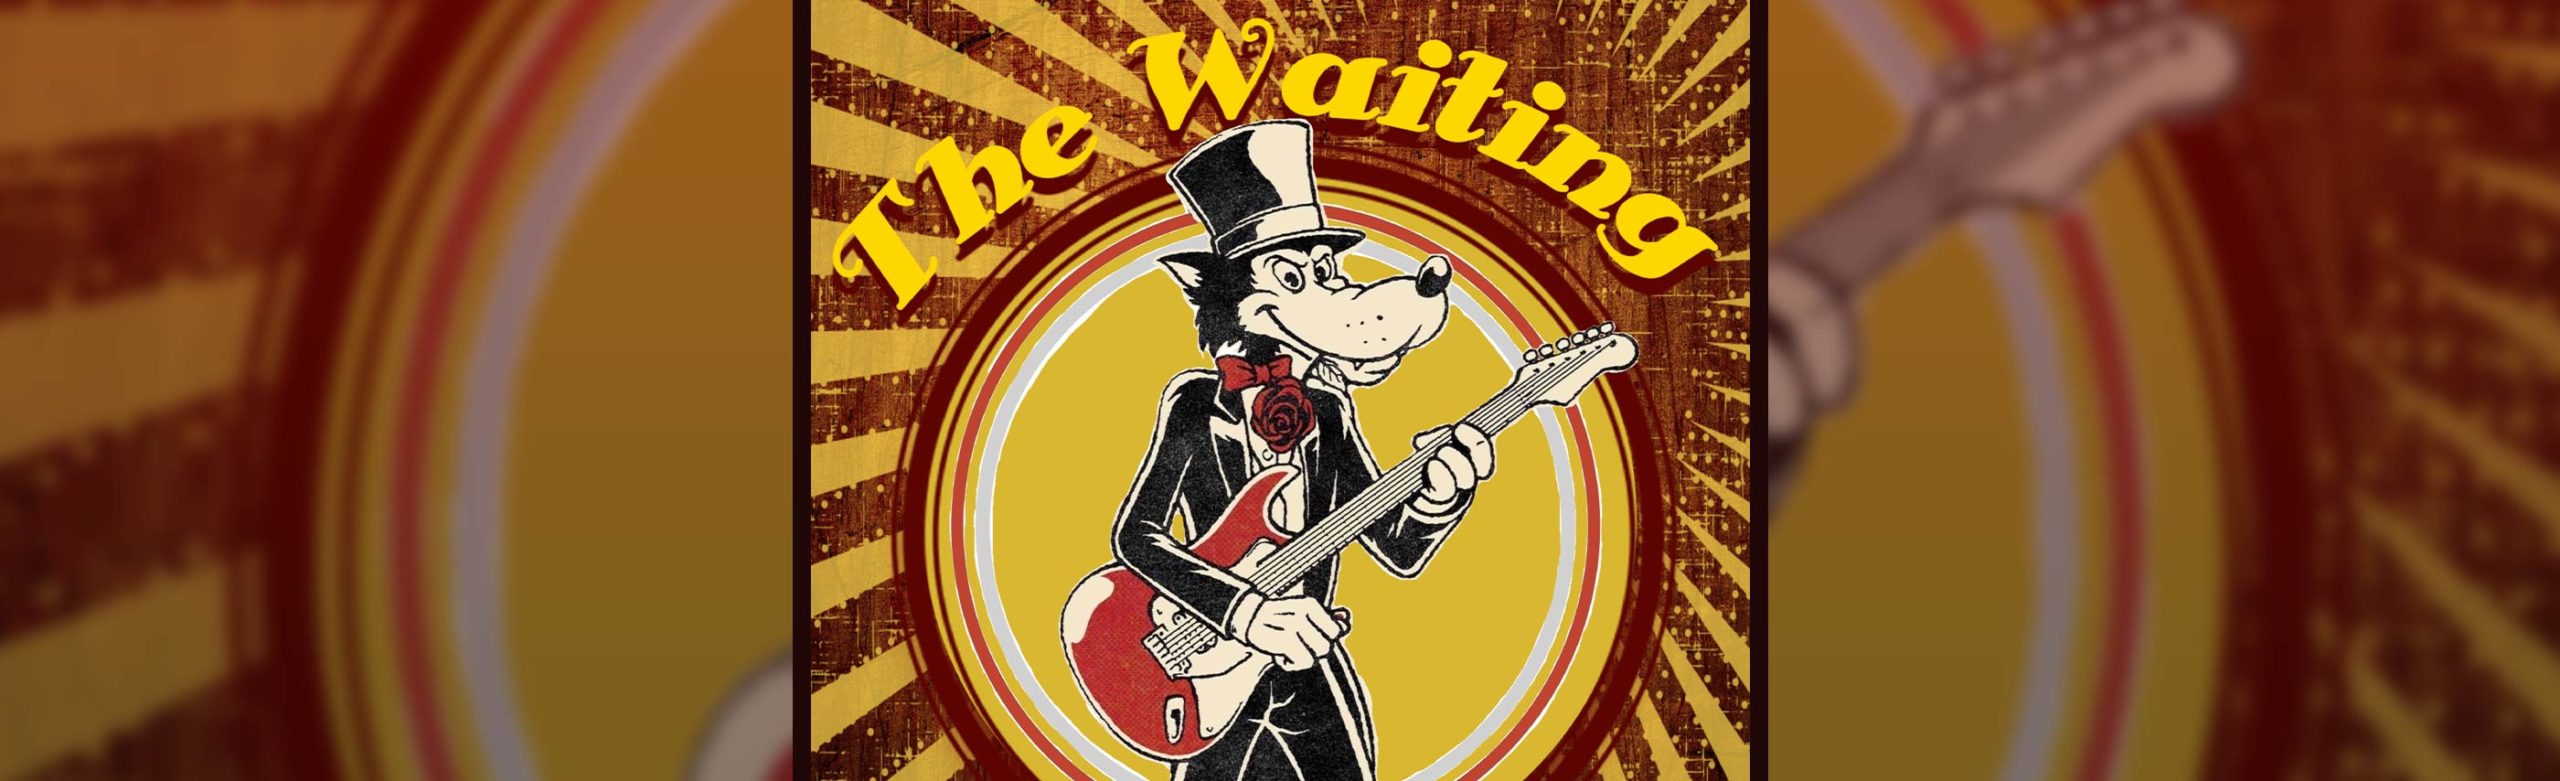 The Waiting Shirt + Ticket Giveaway 2022 Image